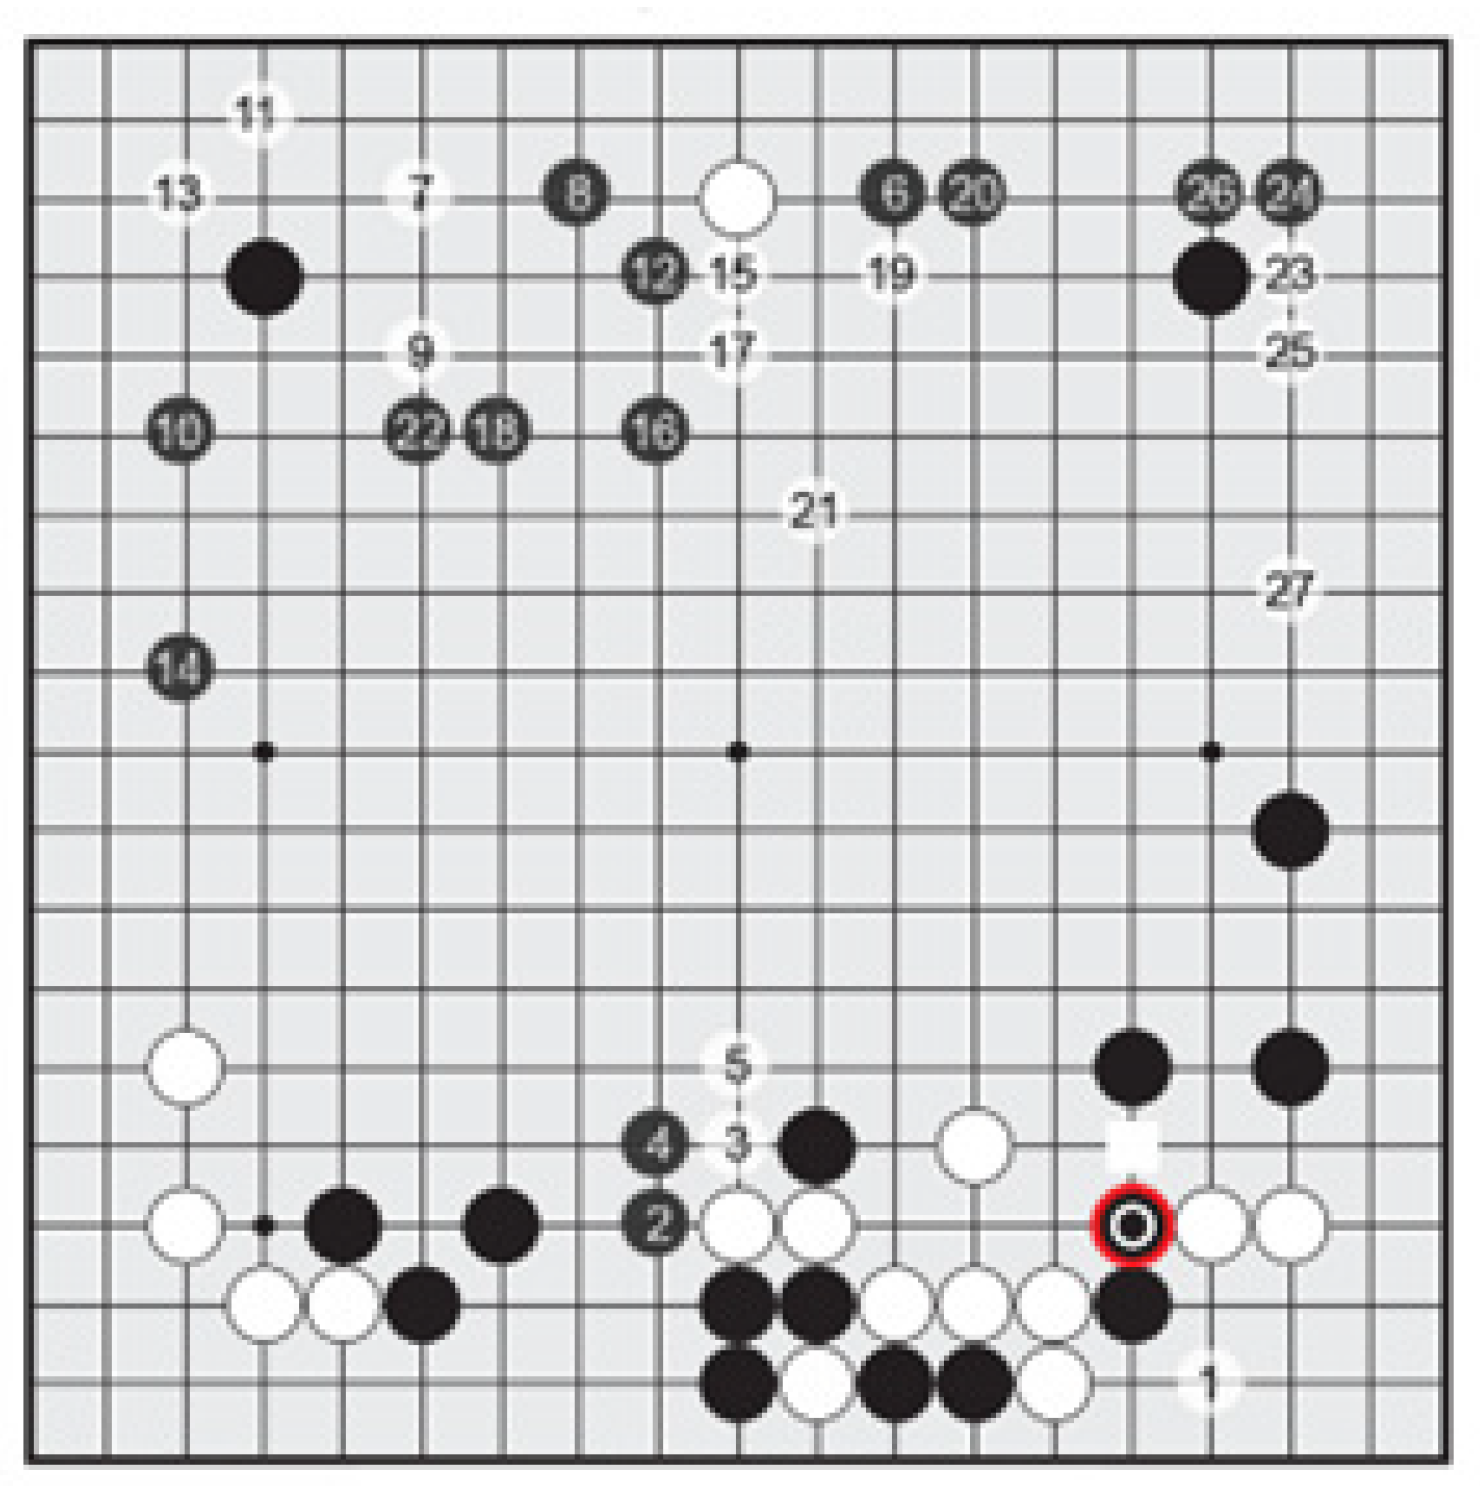 AlphaZero paper published in journal Science : r/baduk